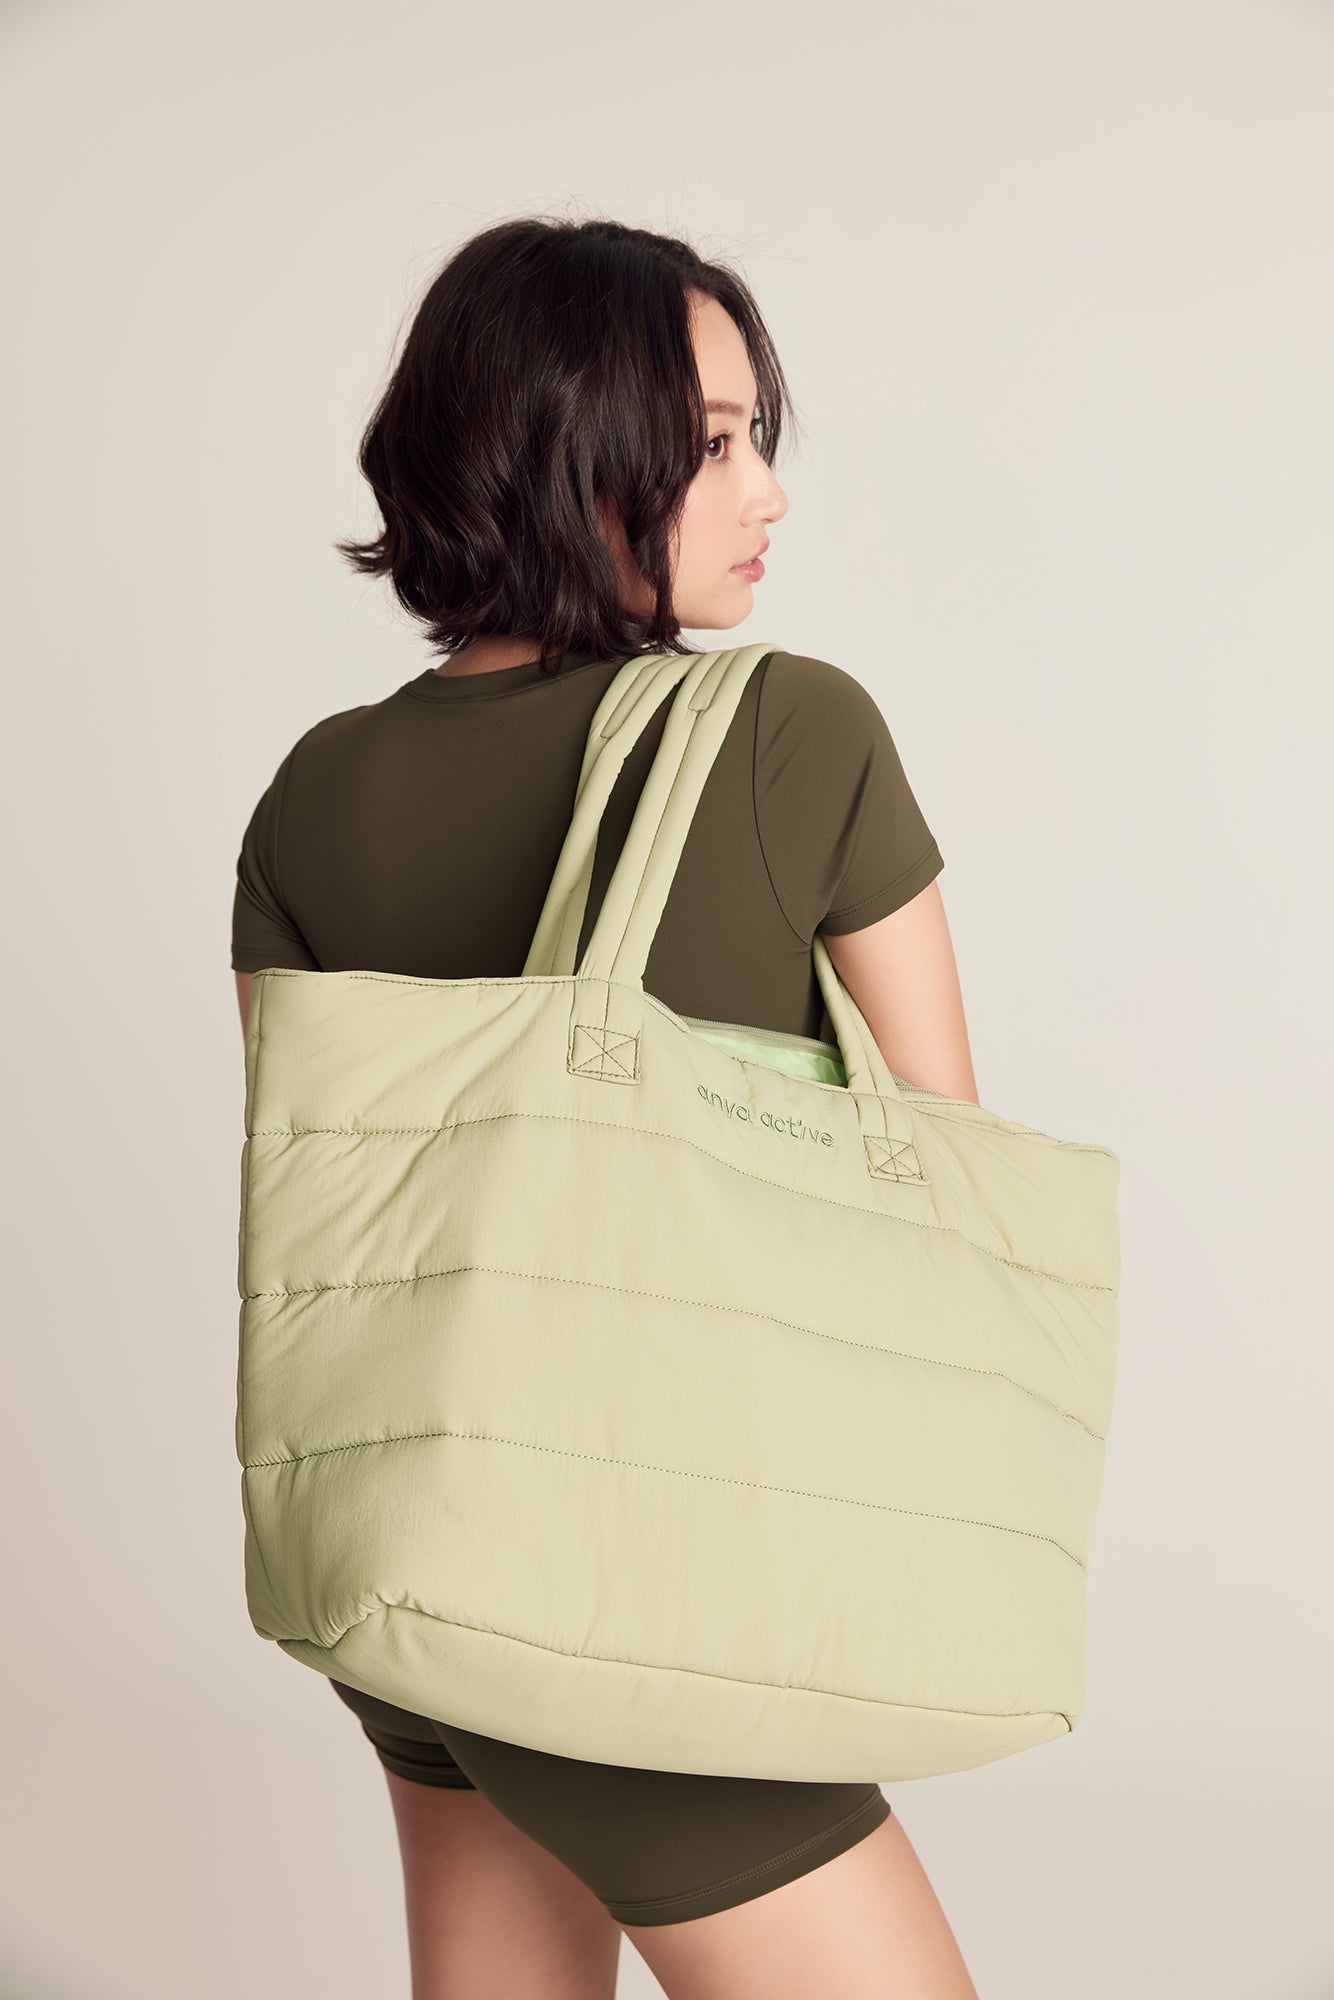 [IMPERFECT] The Oversized Plush Tote in Matcha Latte